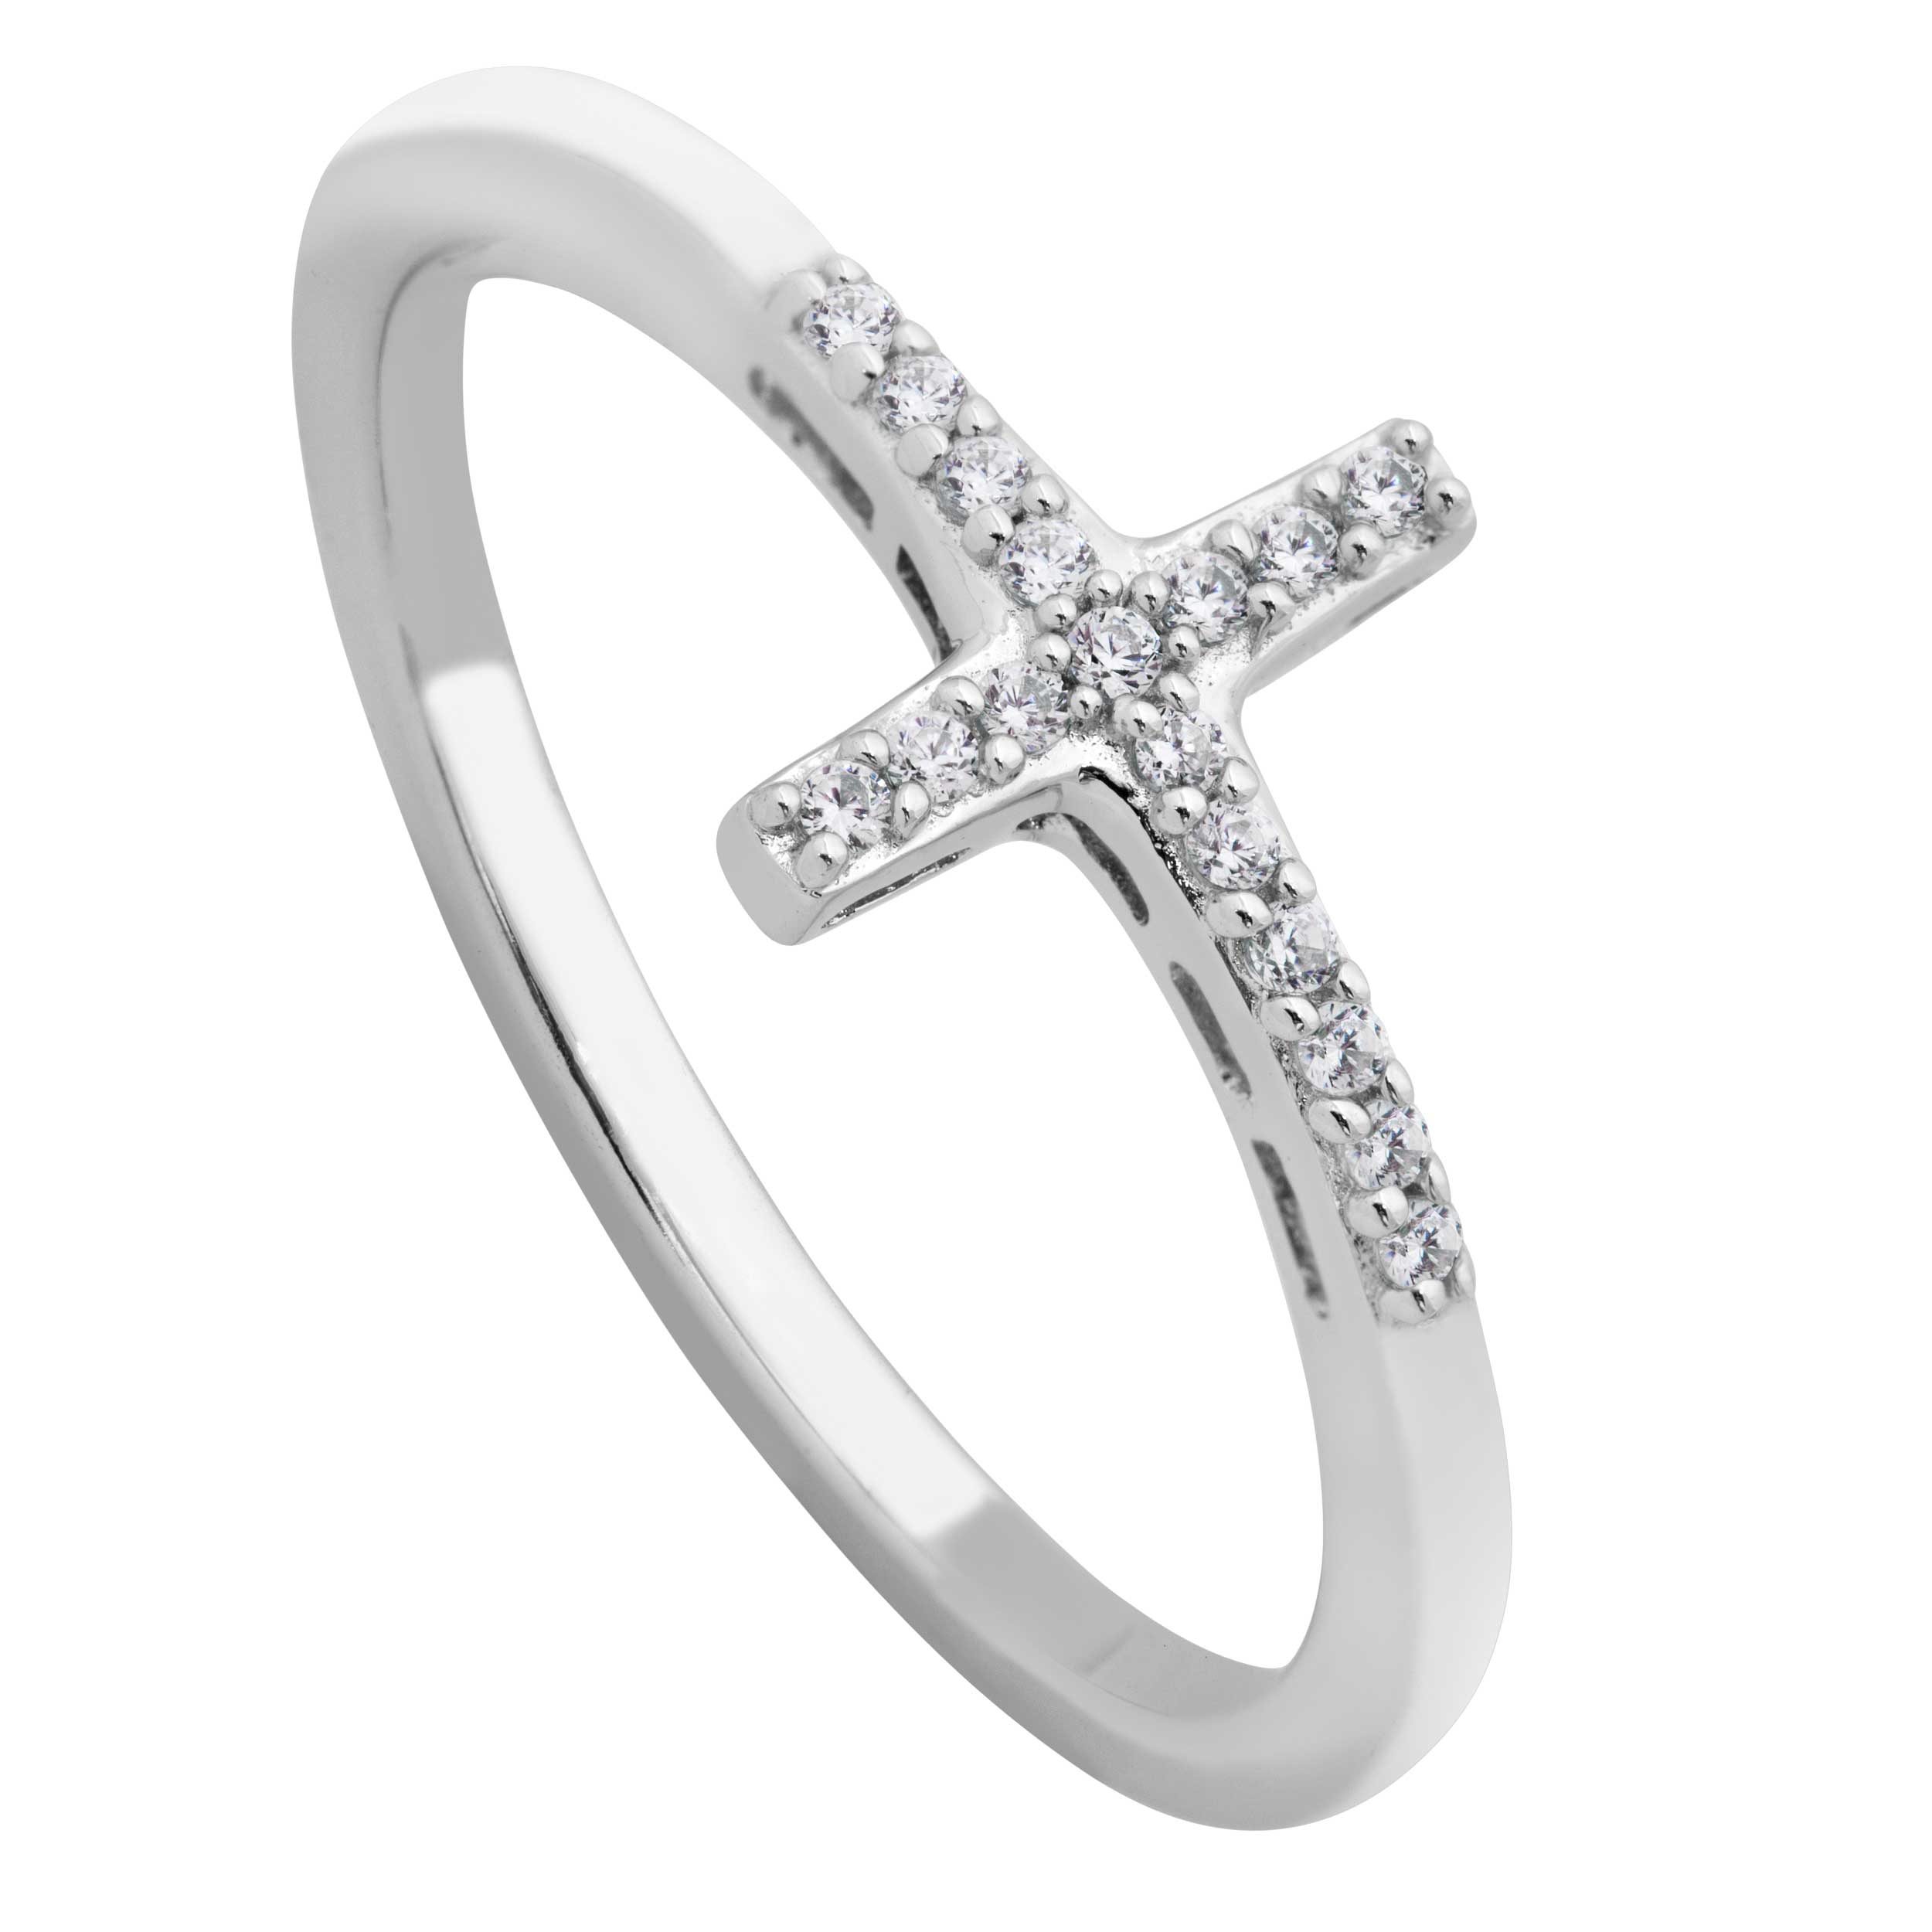 Slim Profile Cross with CZ's Ring, Sterling Silver. 